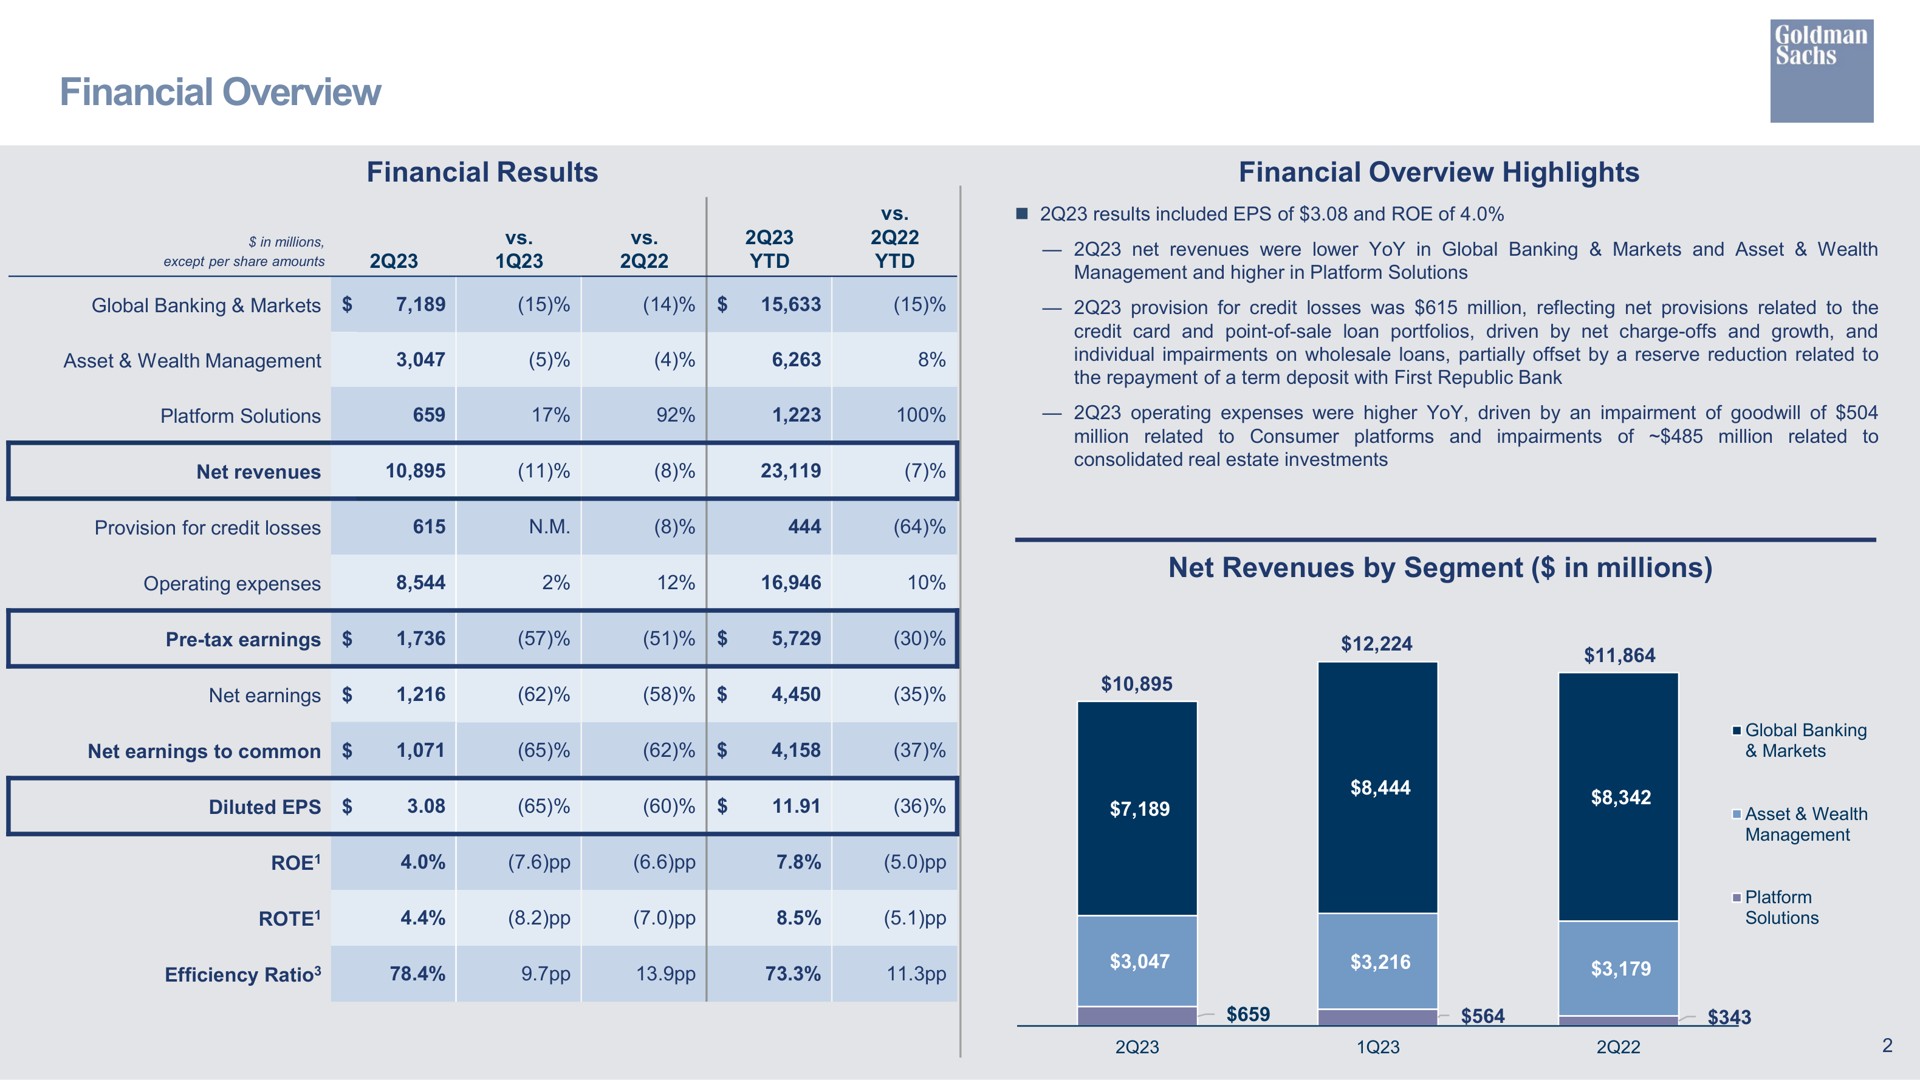 financial overview financial results financial overview highlights net revenues by segment in millions | Goldman Sachs